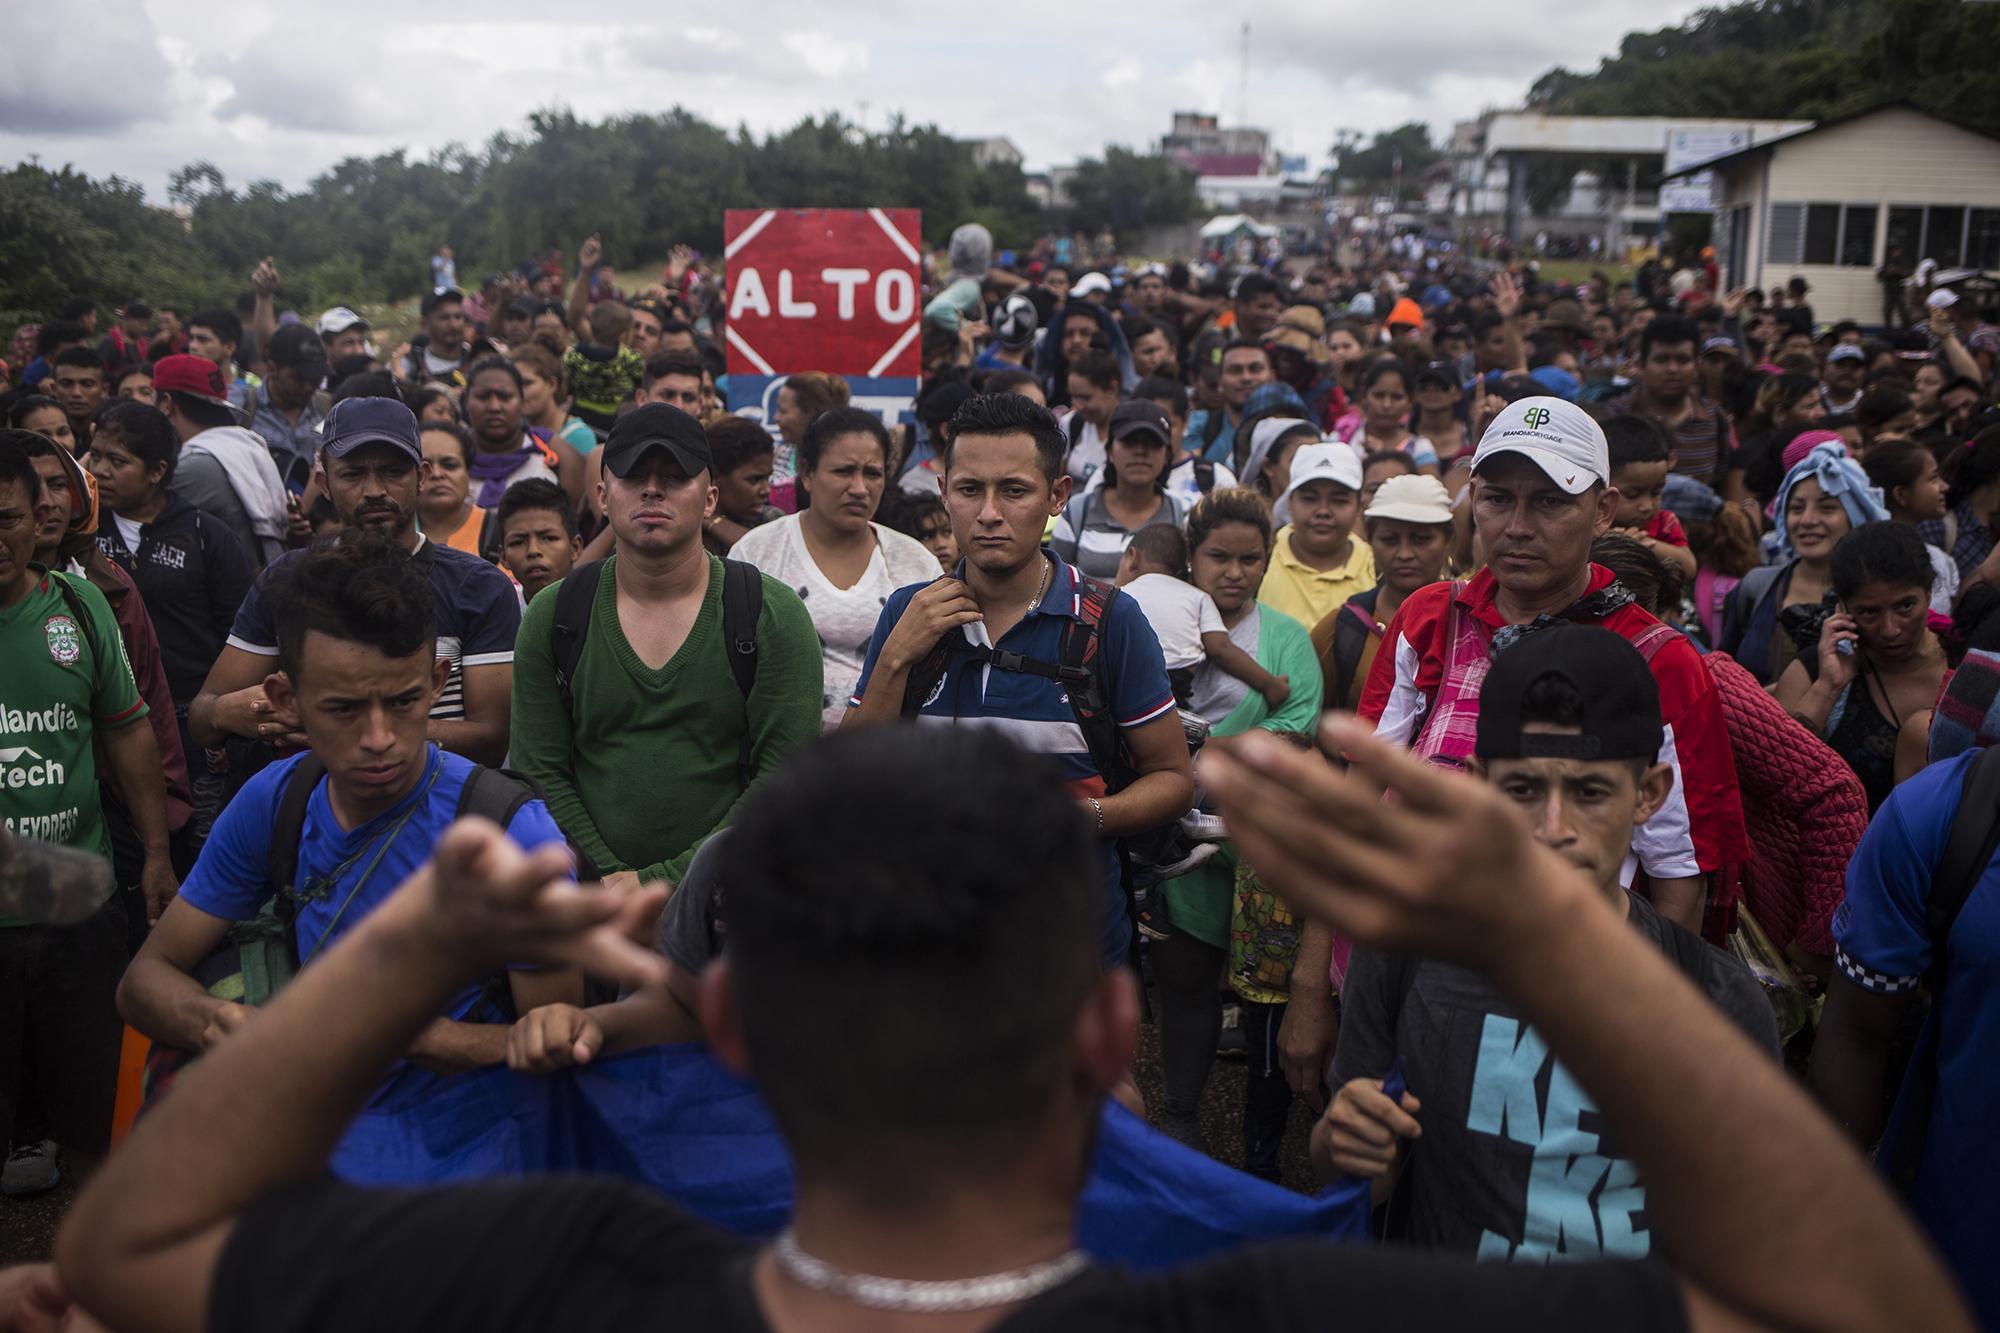 Photo caption: When the caravan hit the Mexican wall, it was leaderless. Since its genesis in San Pedro Sula on January 15, it had made a scattered trek through various roads and borders. In the picture, Óscar Santos, a migrant traveling in the caravan, tries to control the group, which had begun to debate ways to travel through blind spots to cross into Mexico. Photo by Víctor Peña.